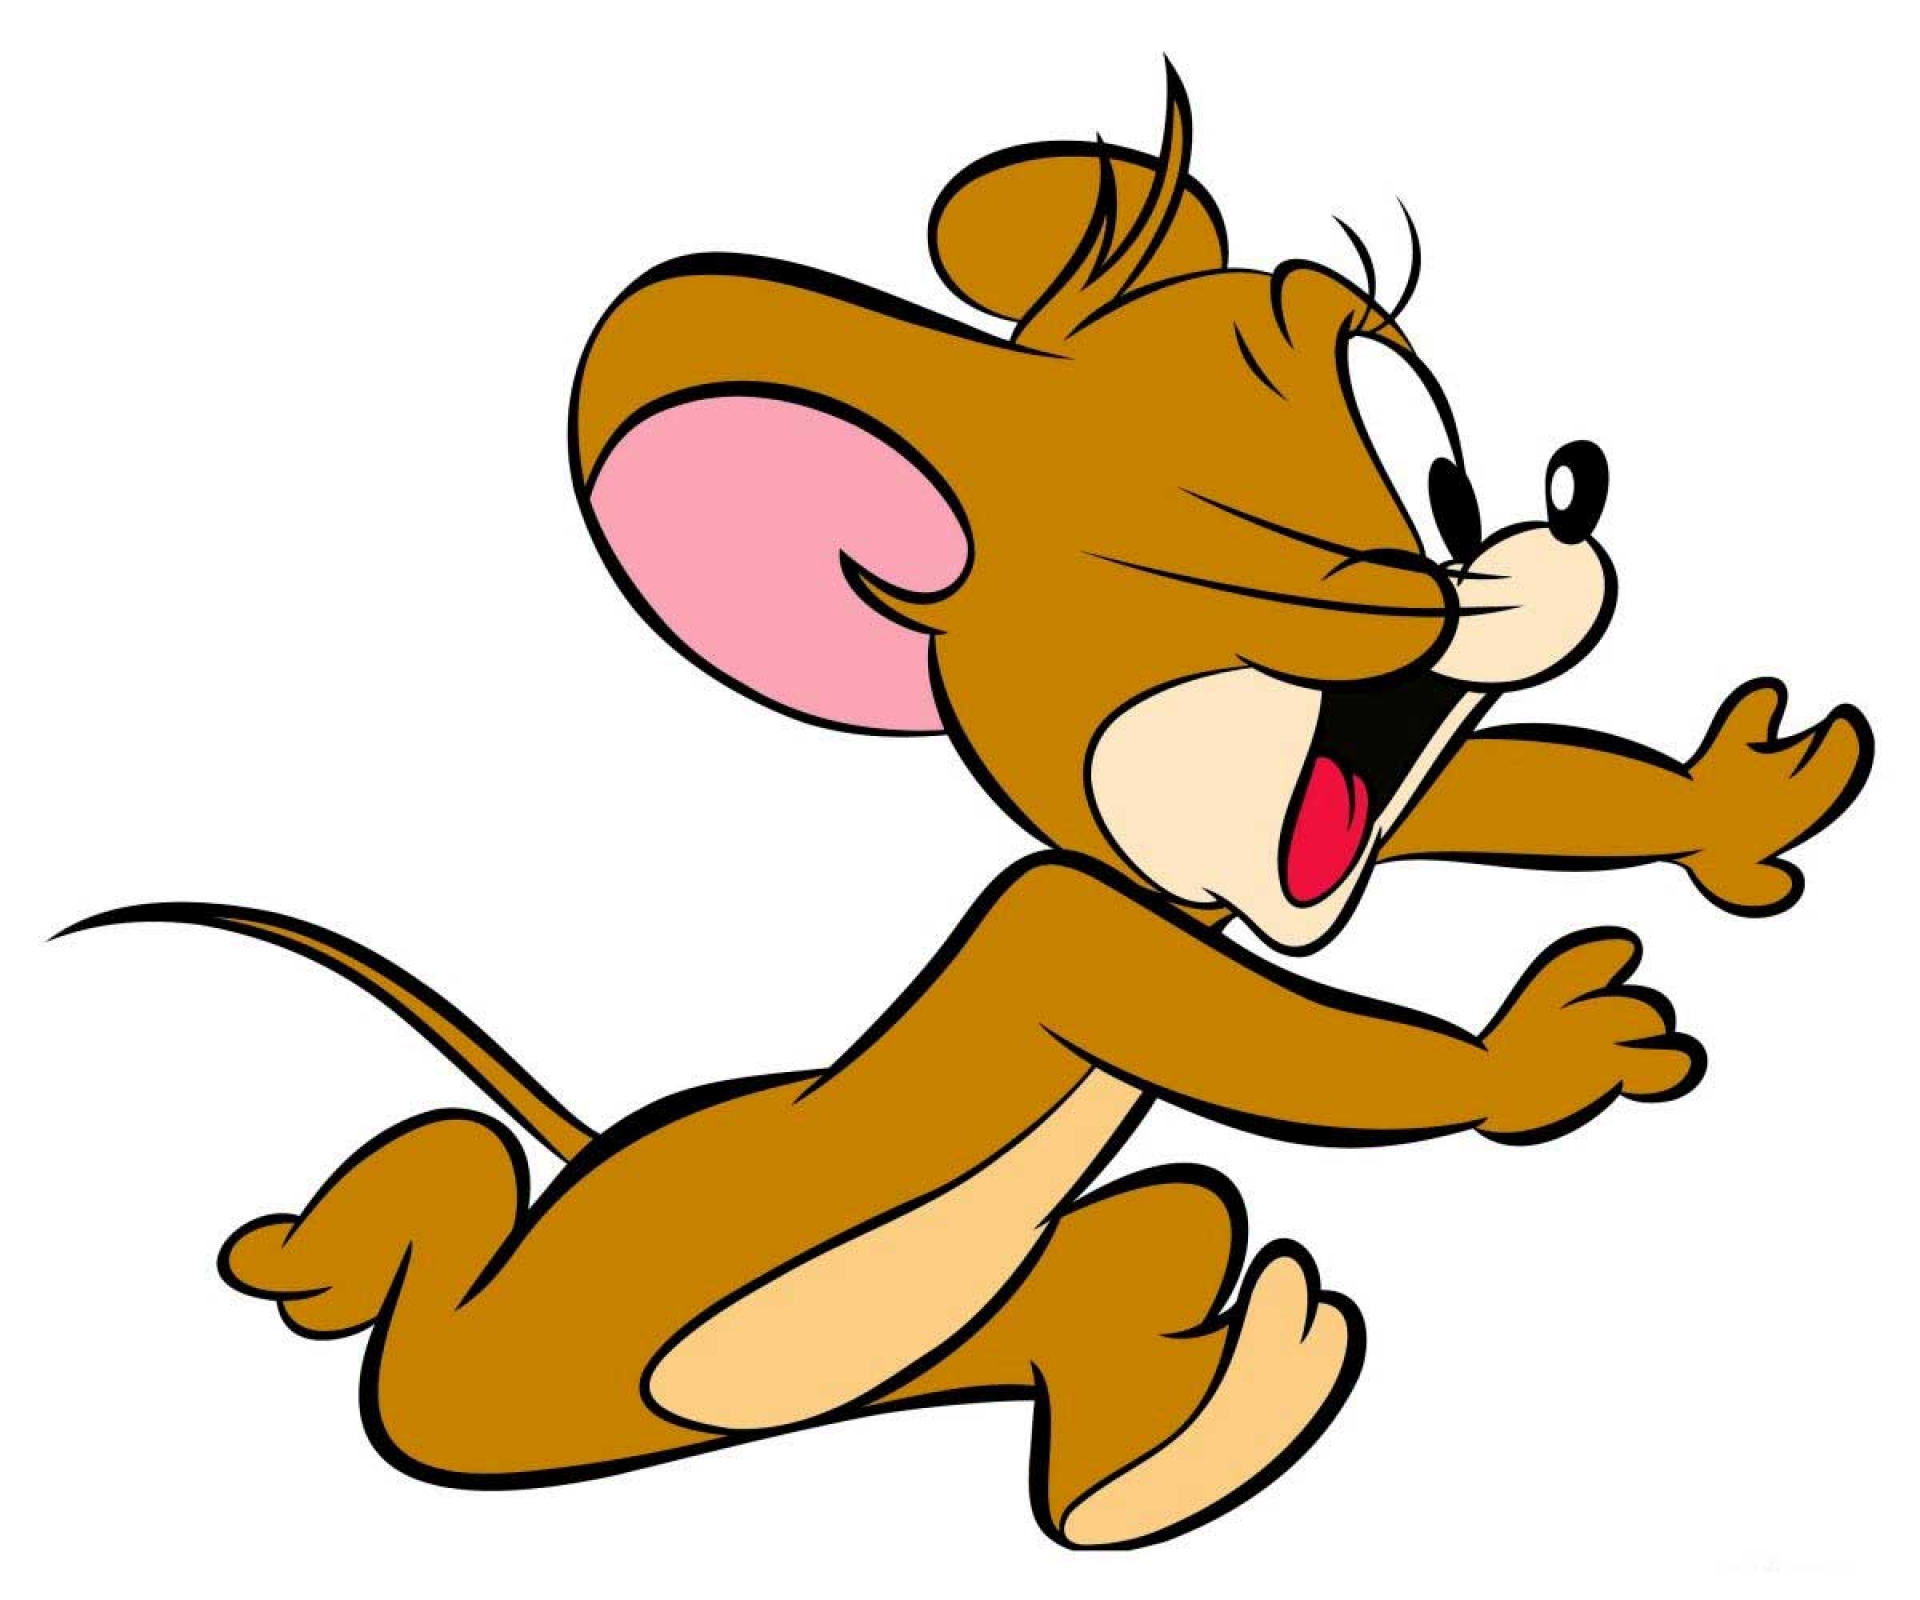 Mouse Cartoon Images - Clipart library 